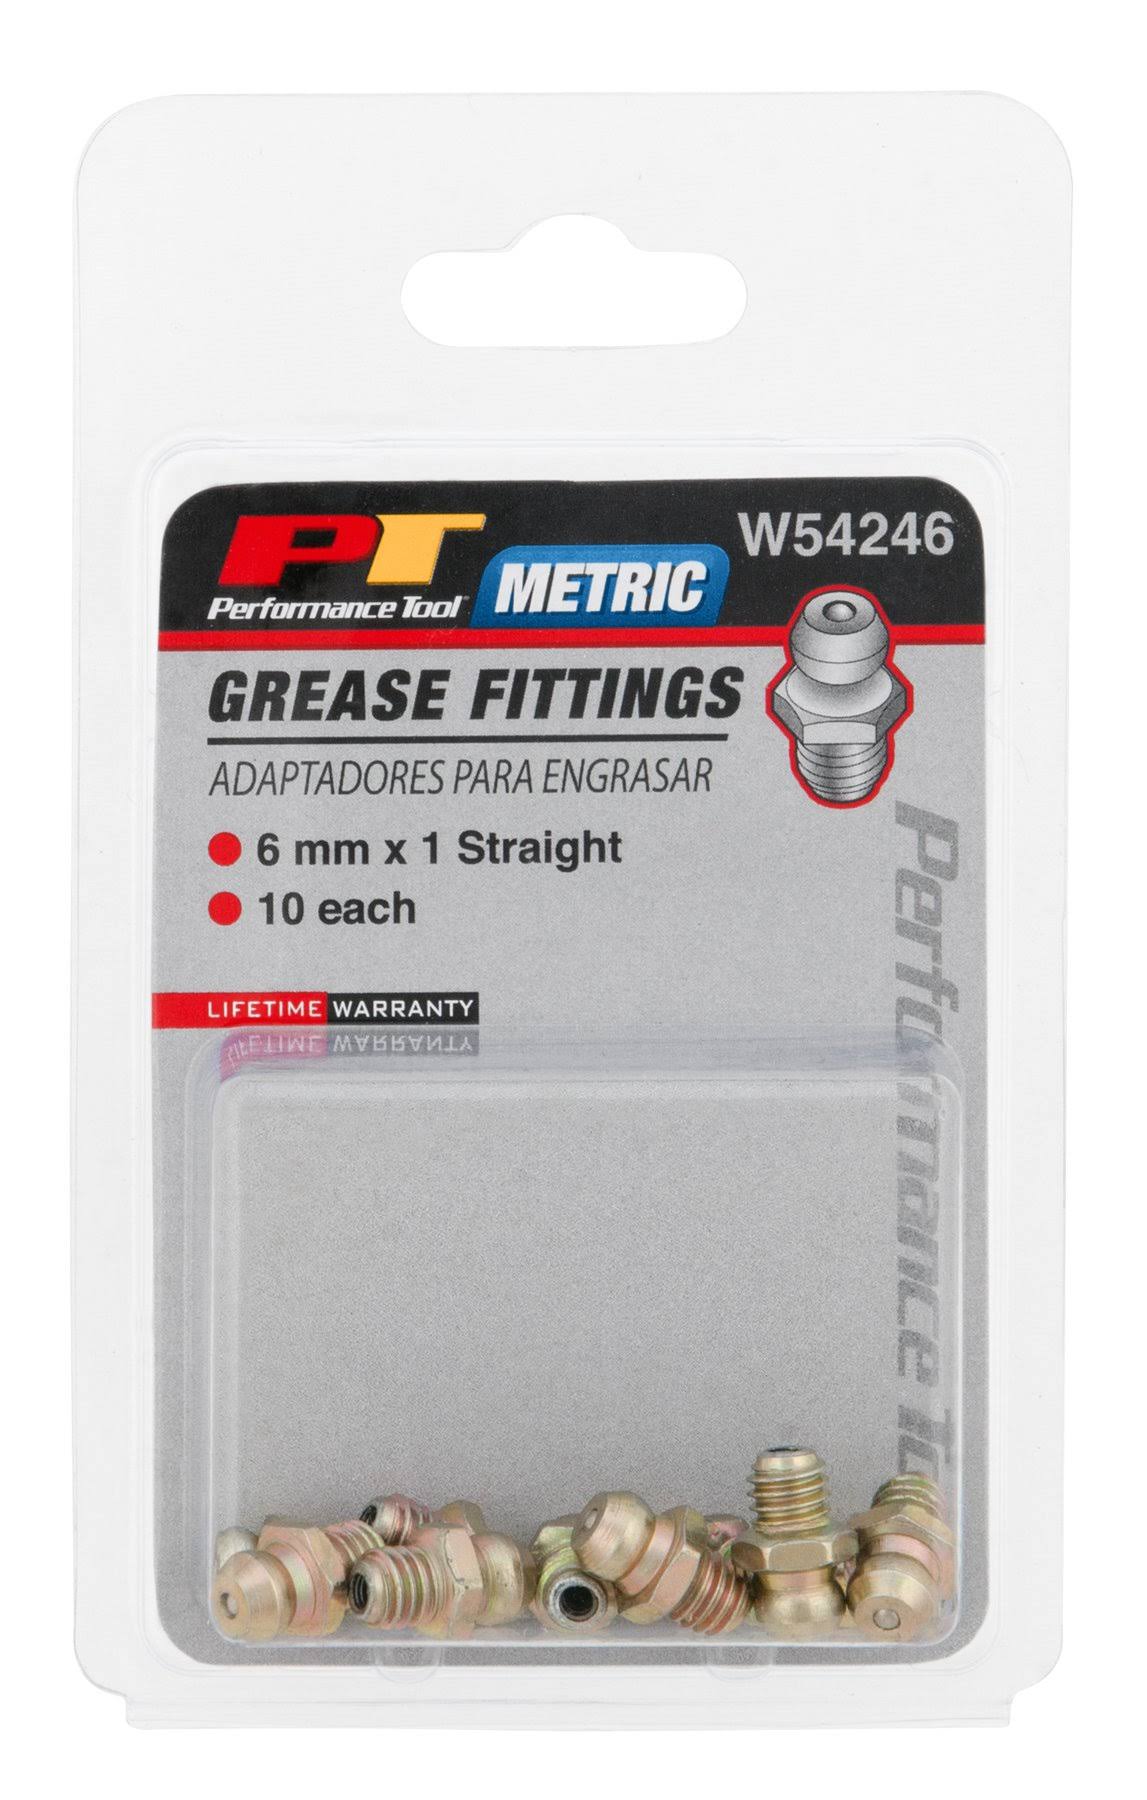 Performance Tool W54246 Grease Fittings - 6mmx1mm, x10